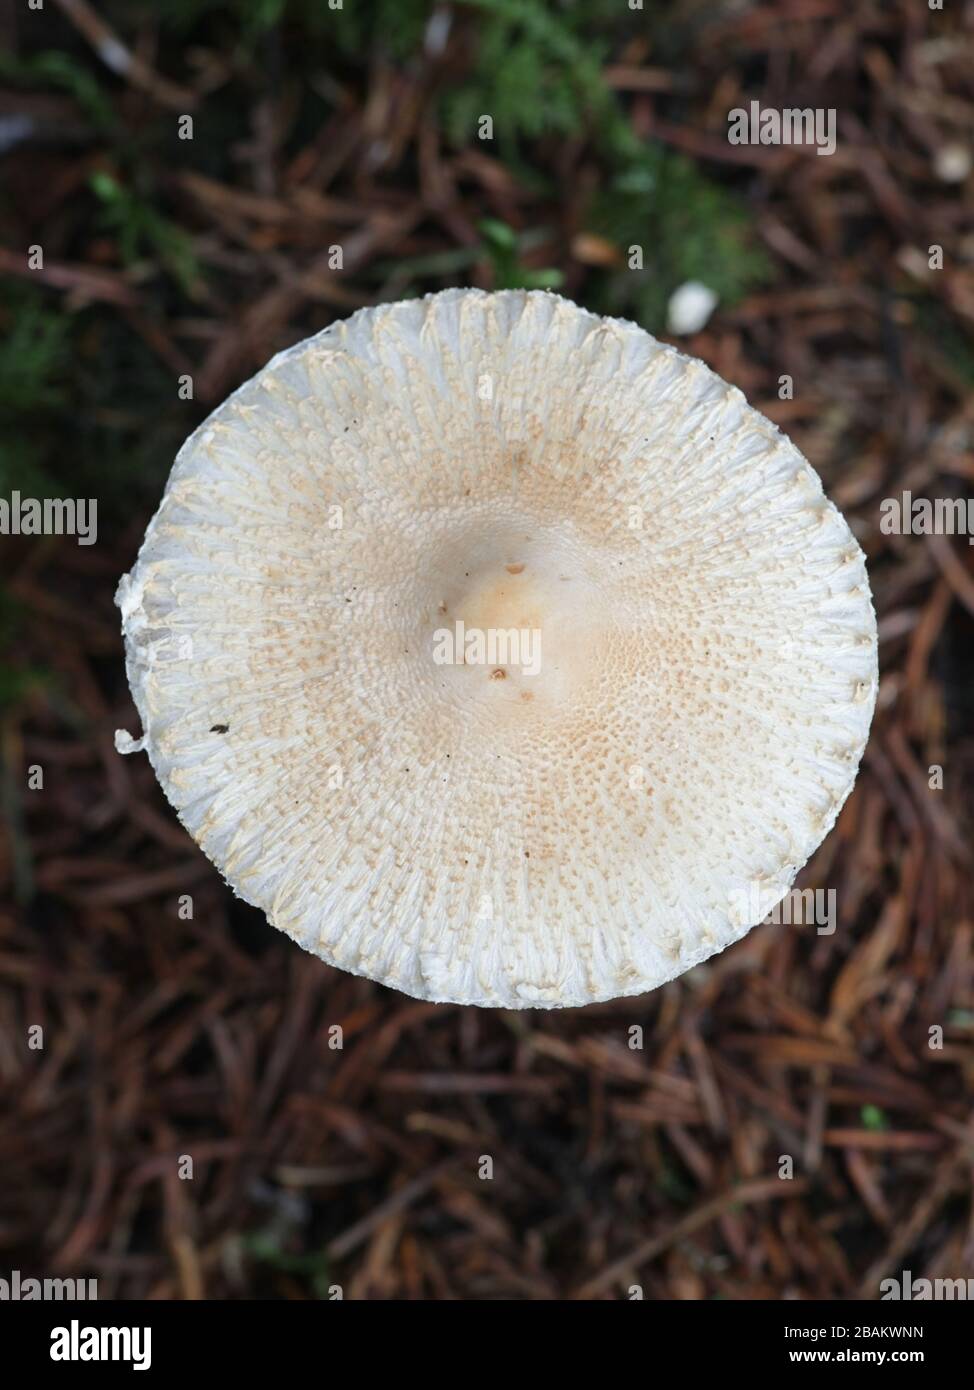 Lepiota clypeolaria, known as the shield dapperling or the shaggy-stalked Lepiota, poisonous mushrooms from Finland Stock Photo